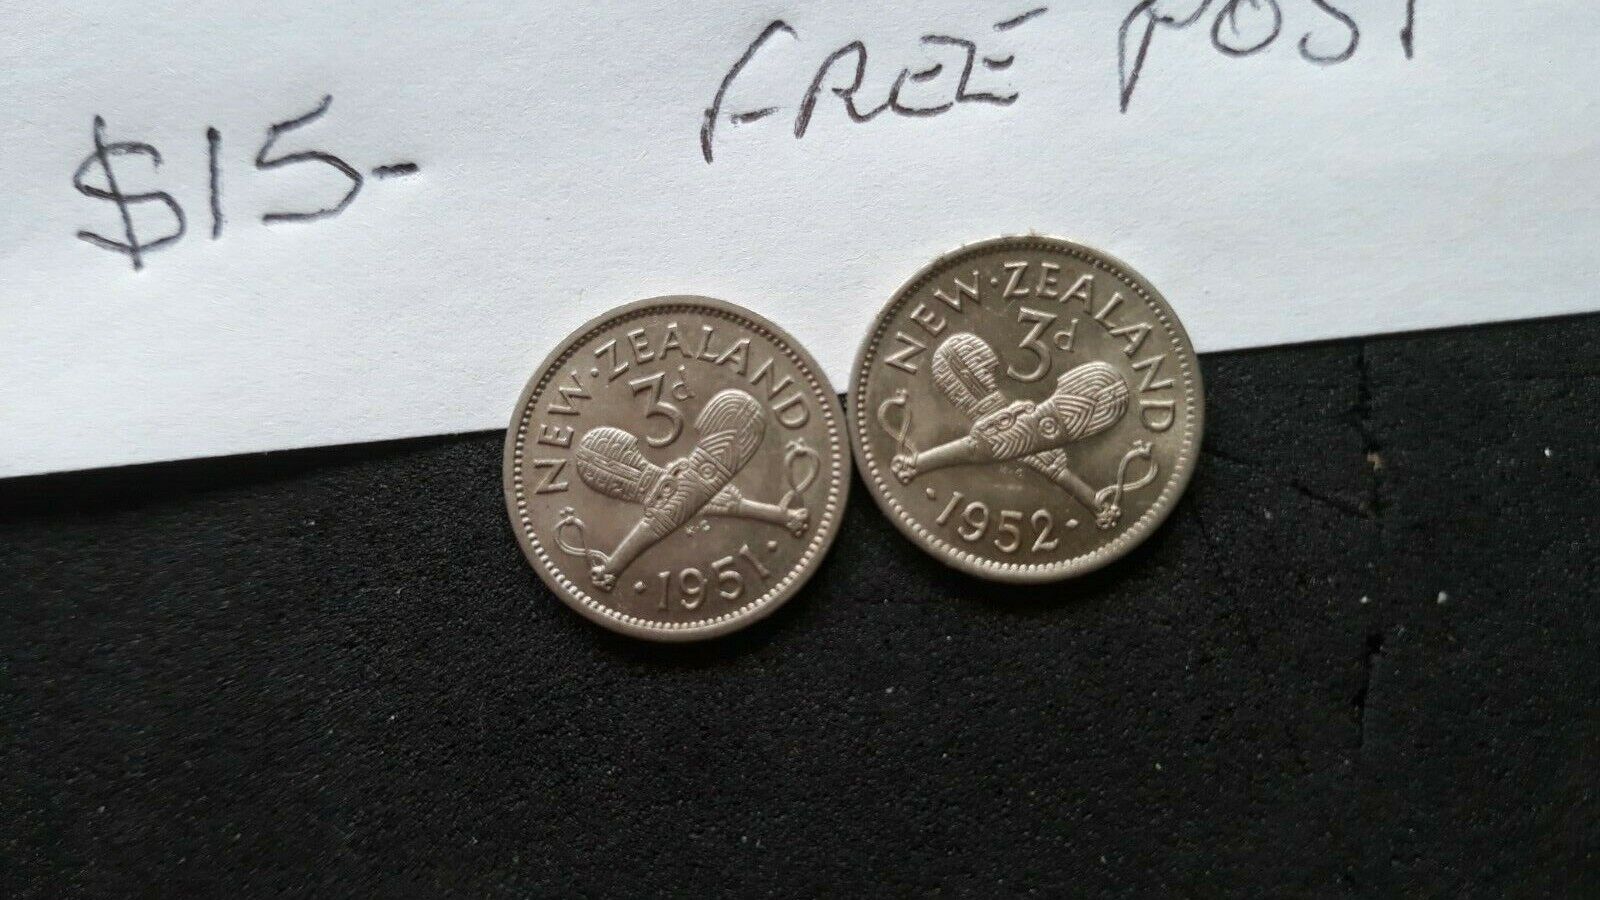 new Zealand coins 3ds see photos x2 1951 52 free post top coins  Без бренда - фотография #2